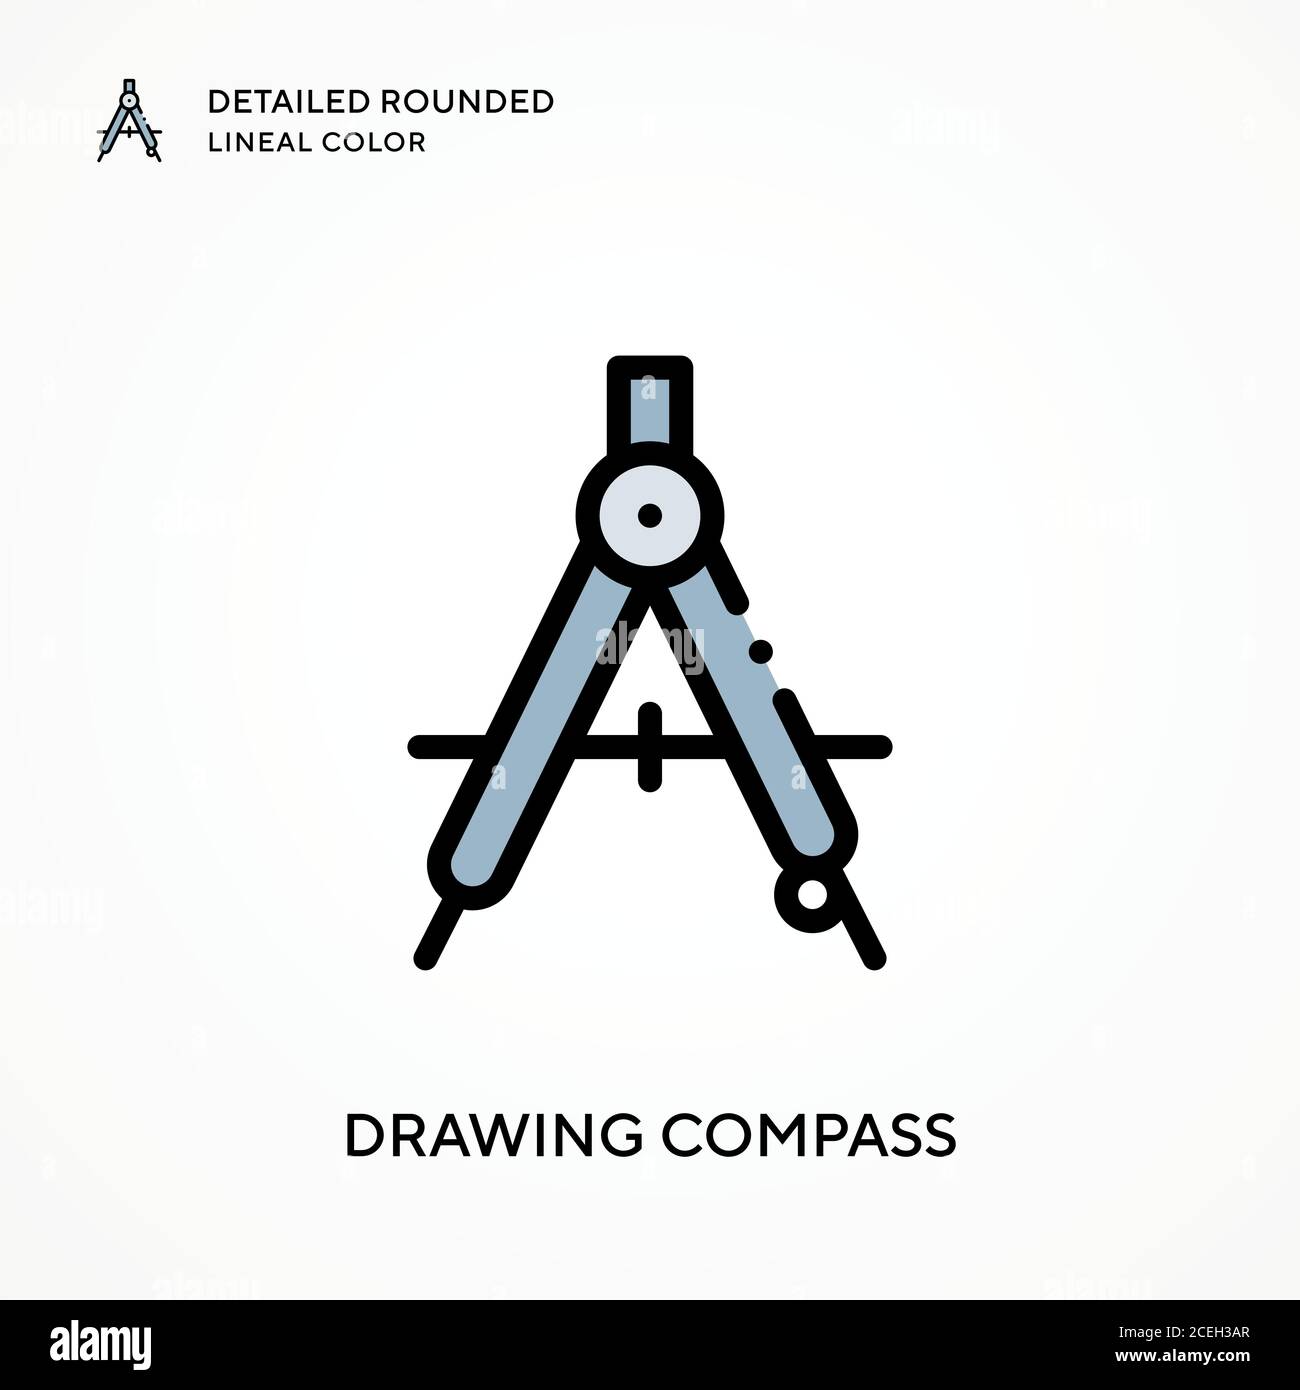 drawing compass detailed rounded lineal color modern vector illustration concepts easy to edit and customize 2CEH3AR